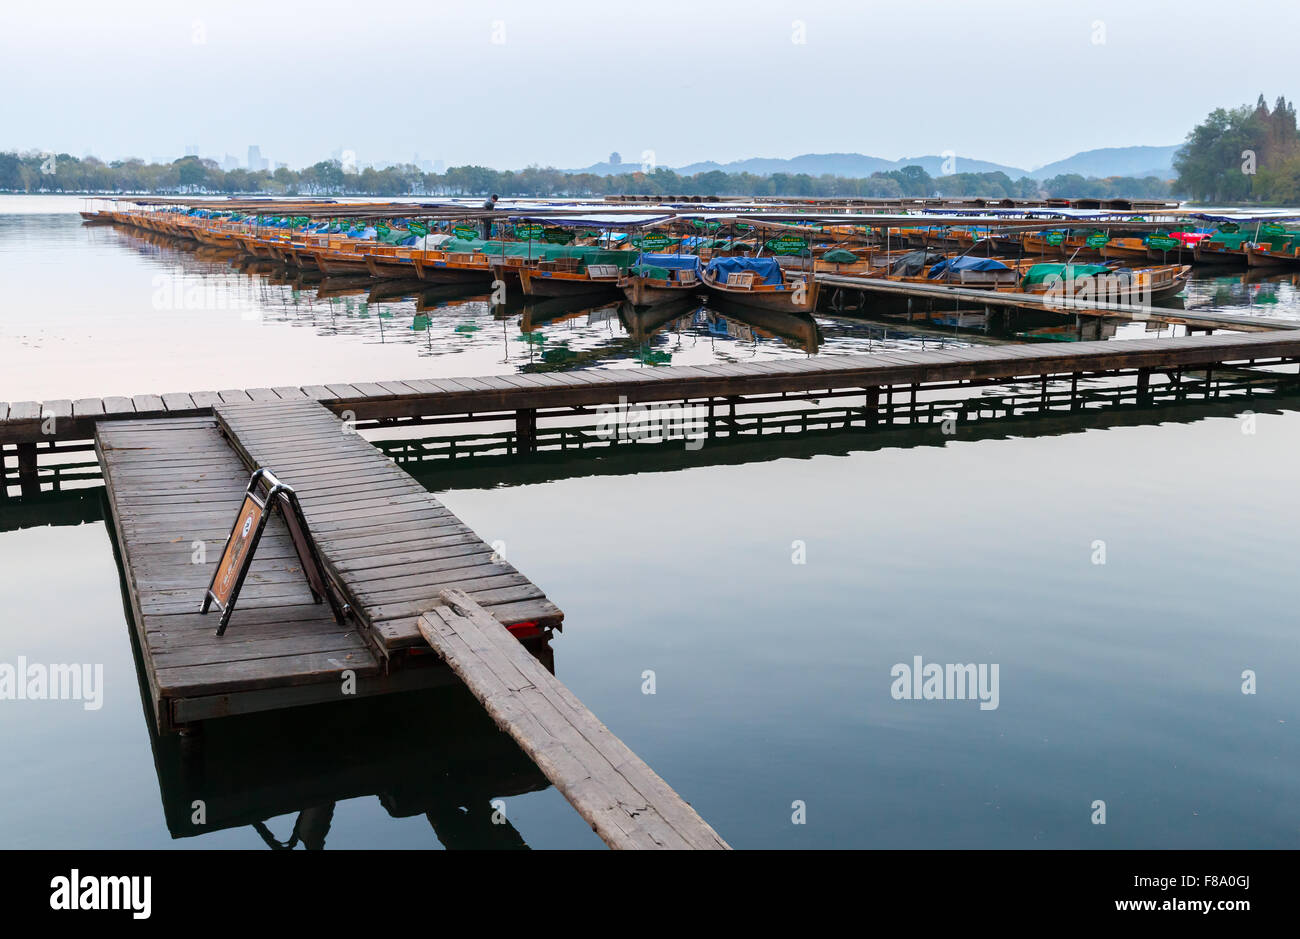 Hangzhou, China - December 4, 2014: Traditional Chinese wooden recreation boats floats moored on the West Lake, famous park in H Stock Photo